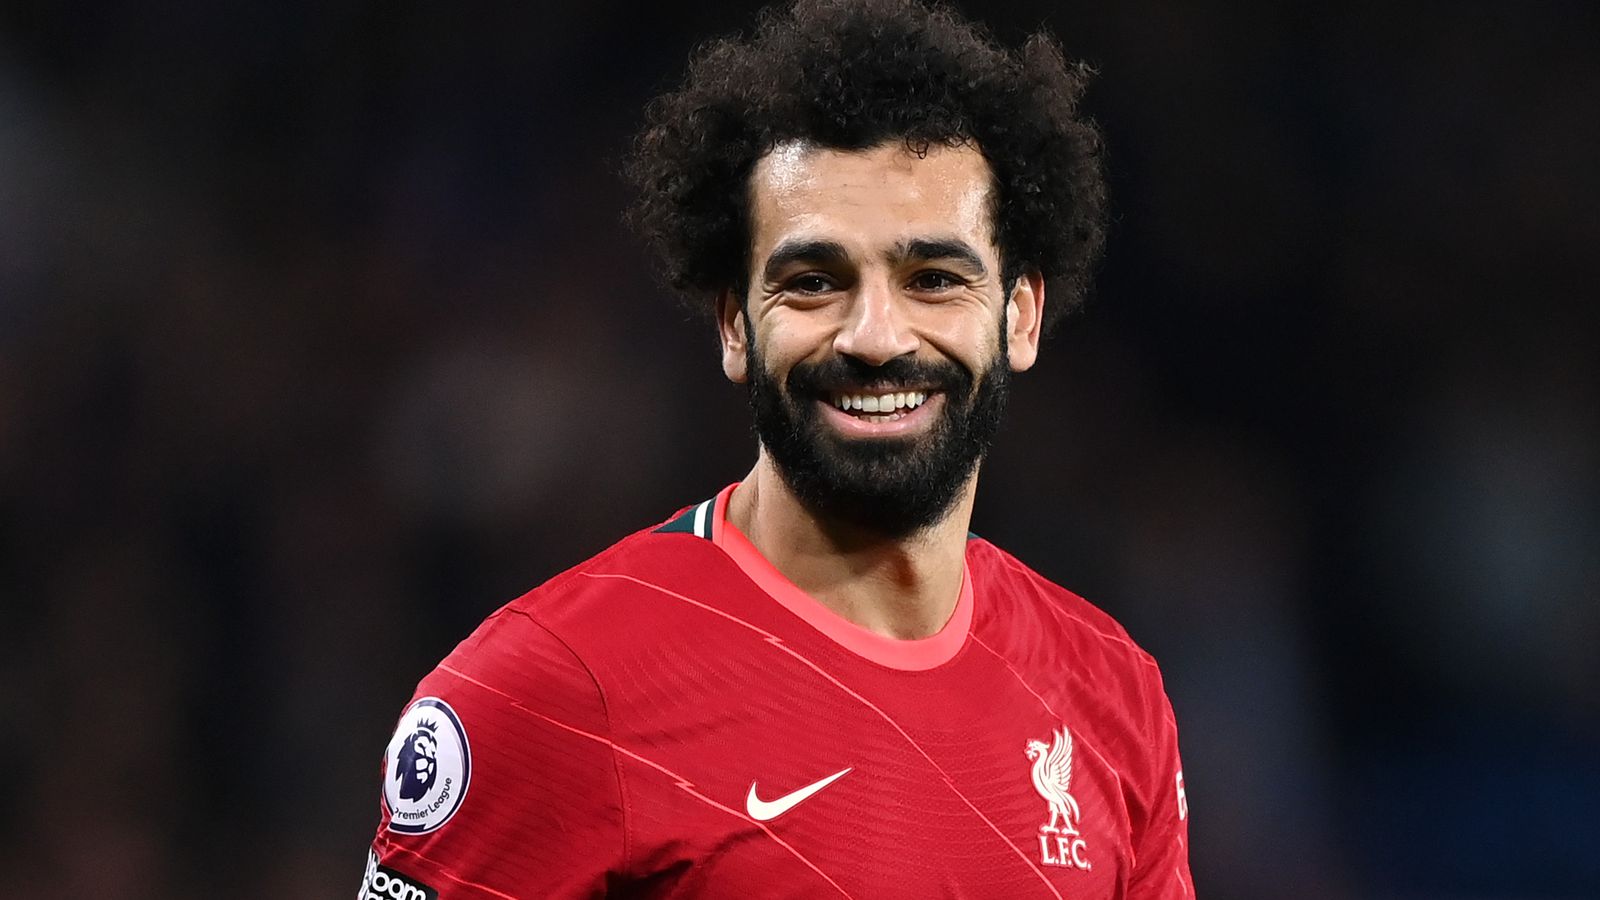 Mohamed Salah: Liverpool forward says he is 'not asking for crazy stuff' as contract talks drag on